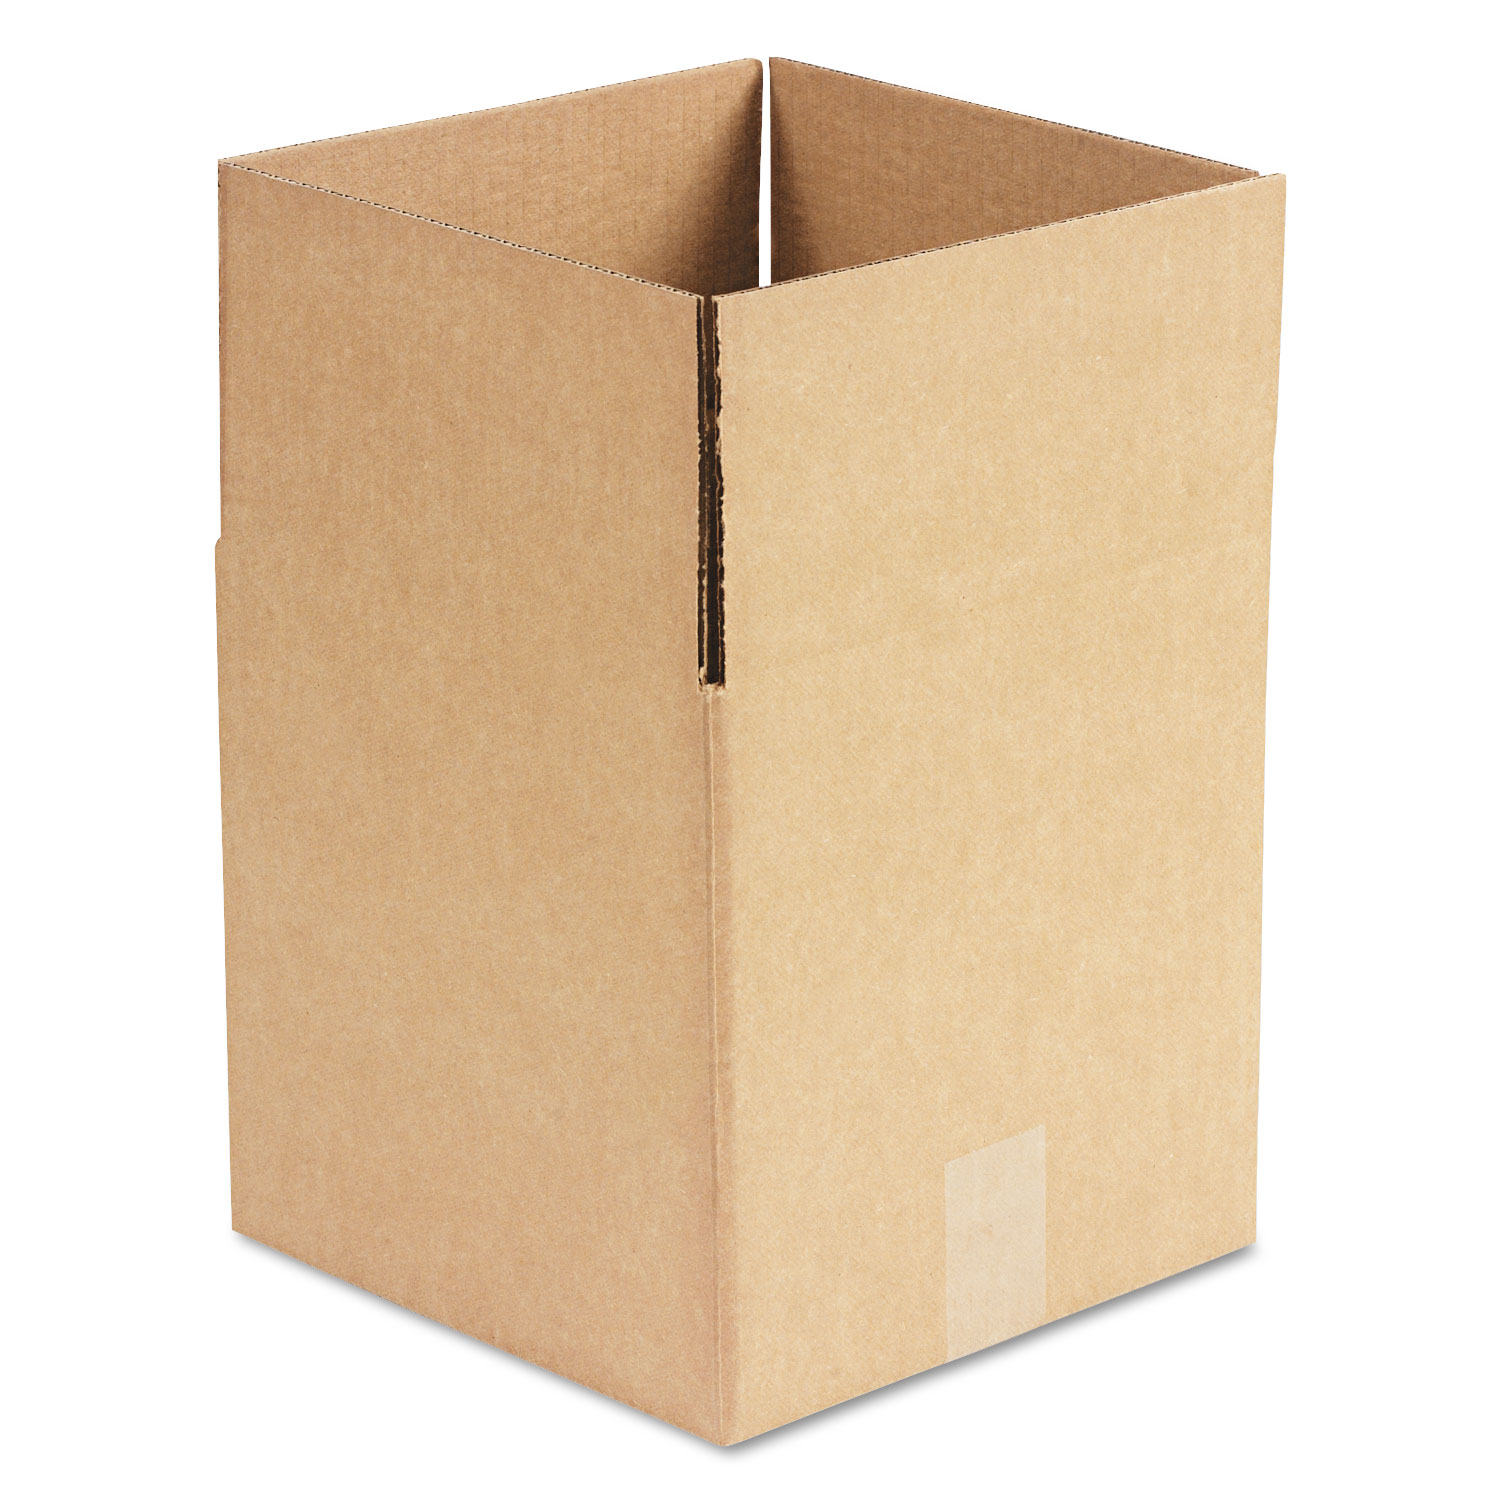  General Supply UFS101010 Cubed Fixed-Depth Shipping Boxes, Regular Slotted Container (RSC), 10 x 10 x 10, Brown Kraft, 25/Bundle (UFS101010) 